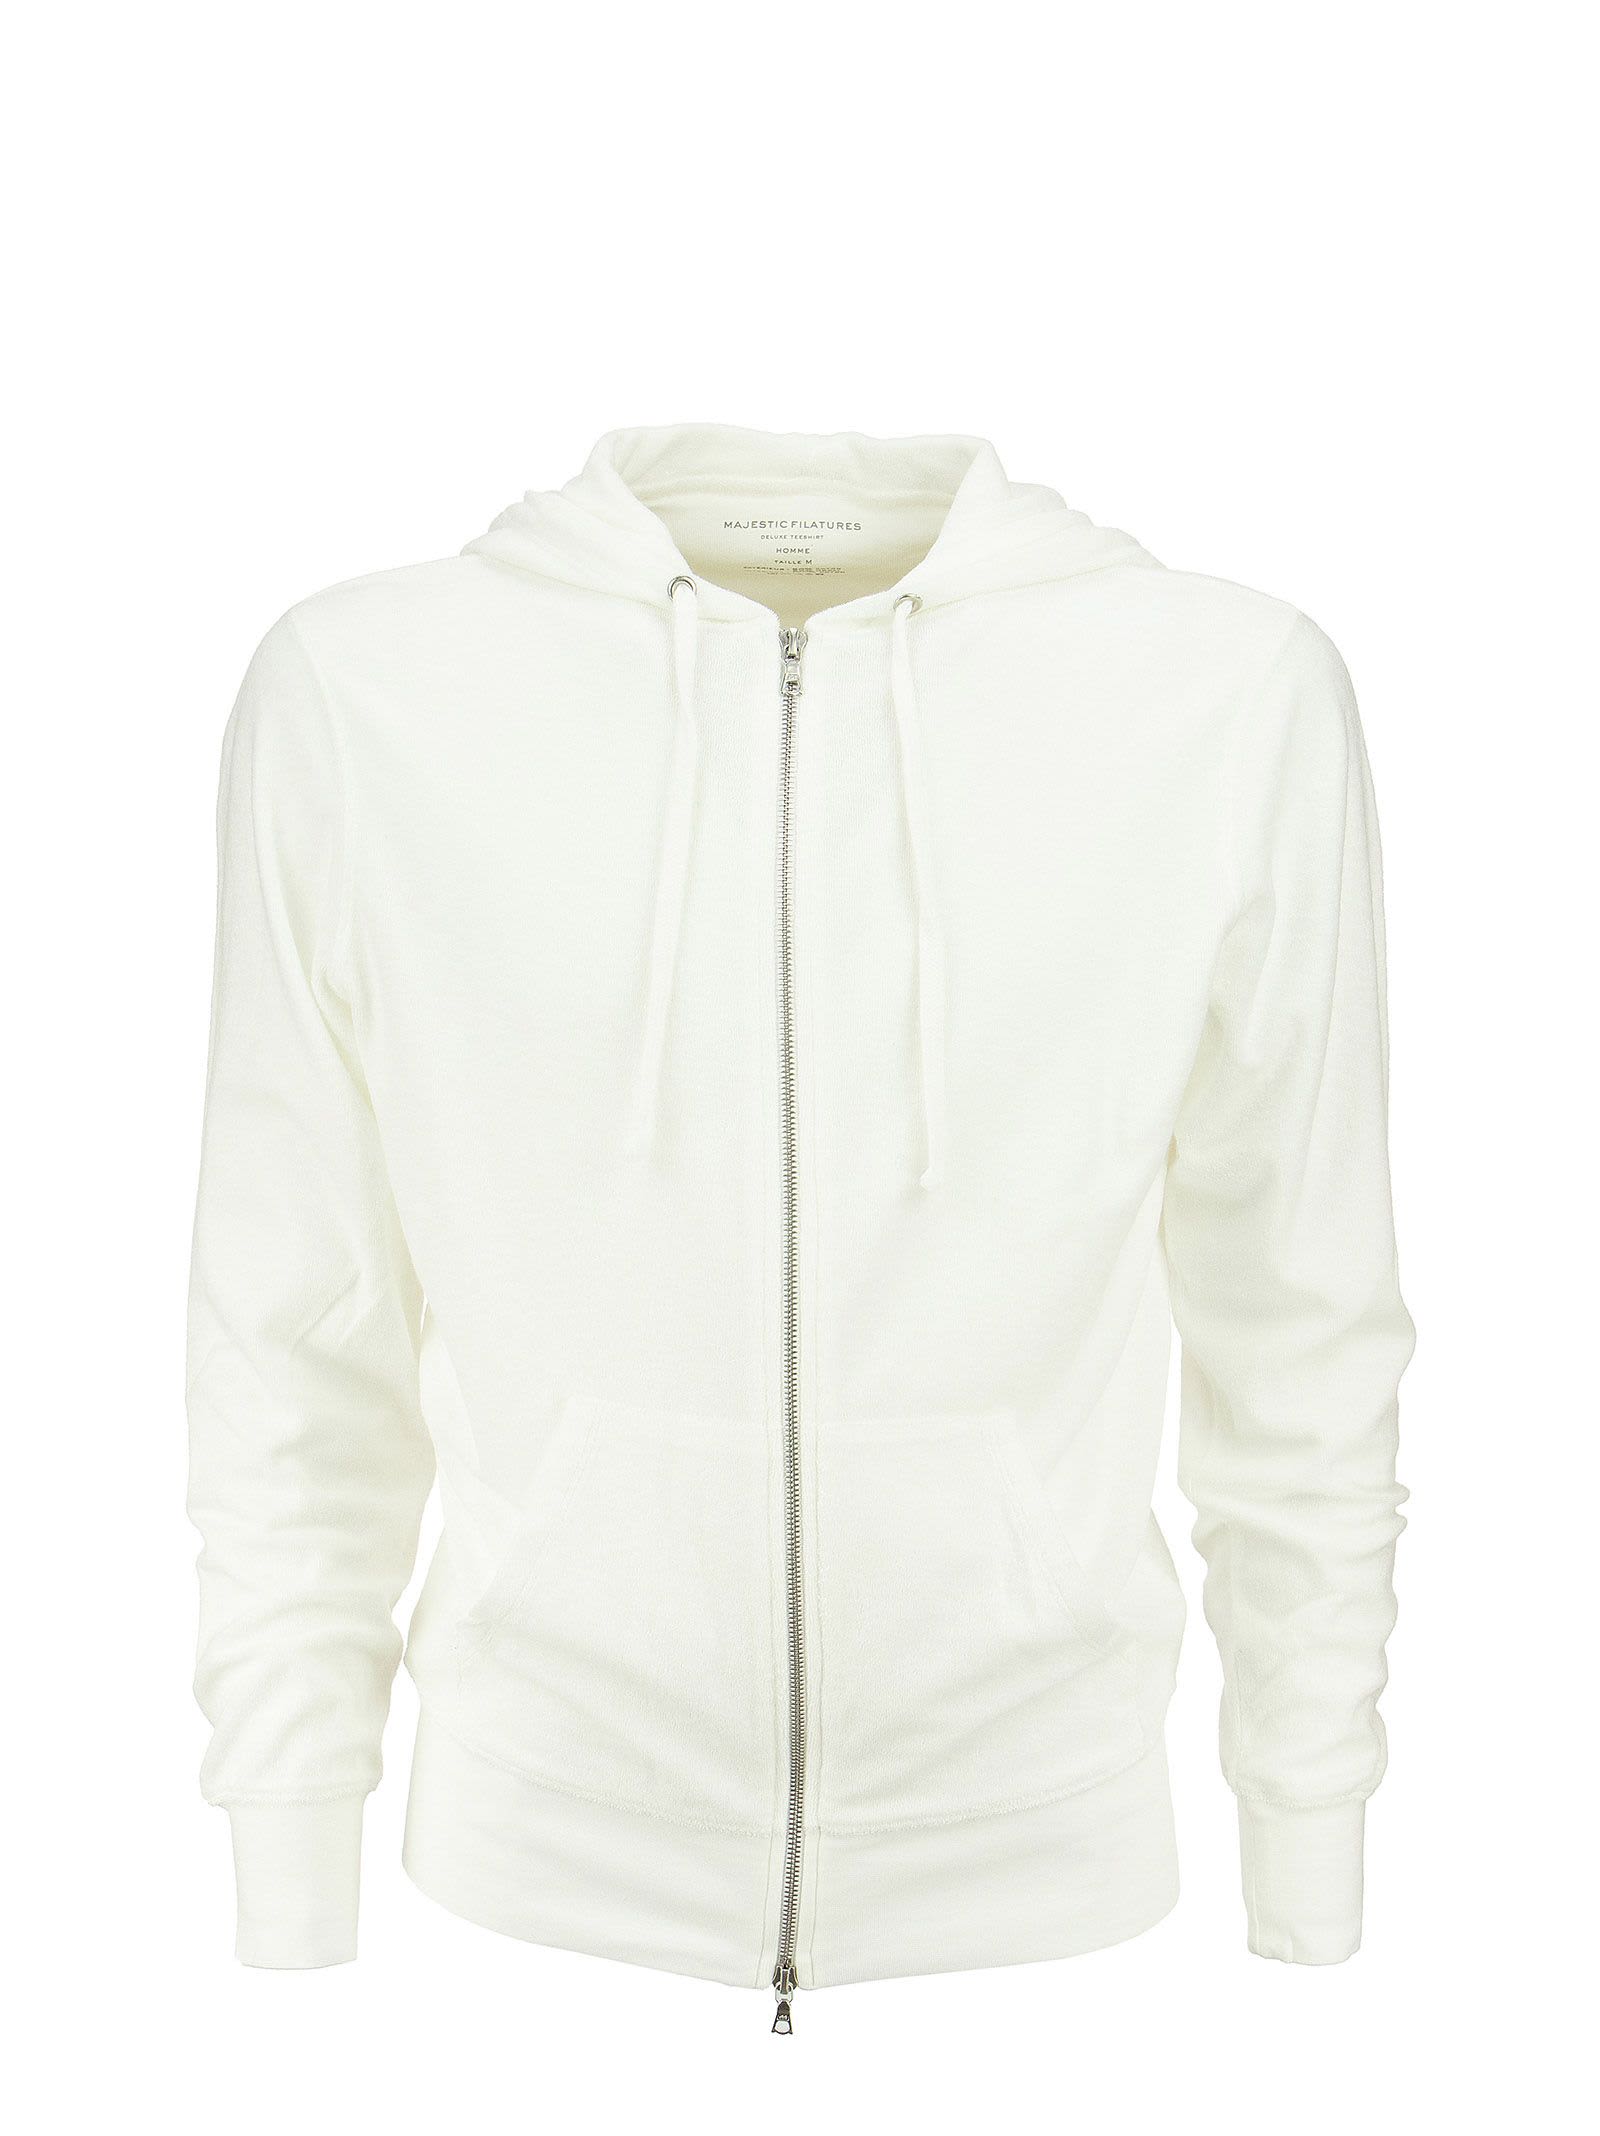 MAJESTIC HOODED SWEATSHIRT IN COTTON AND MODAL,M242 HSW036 001